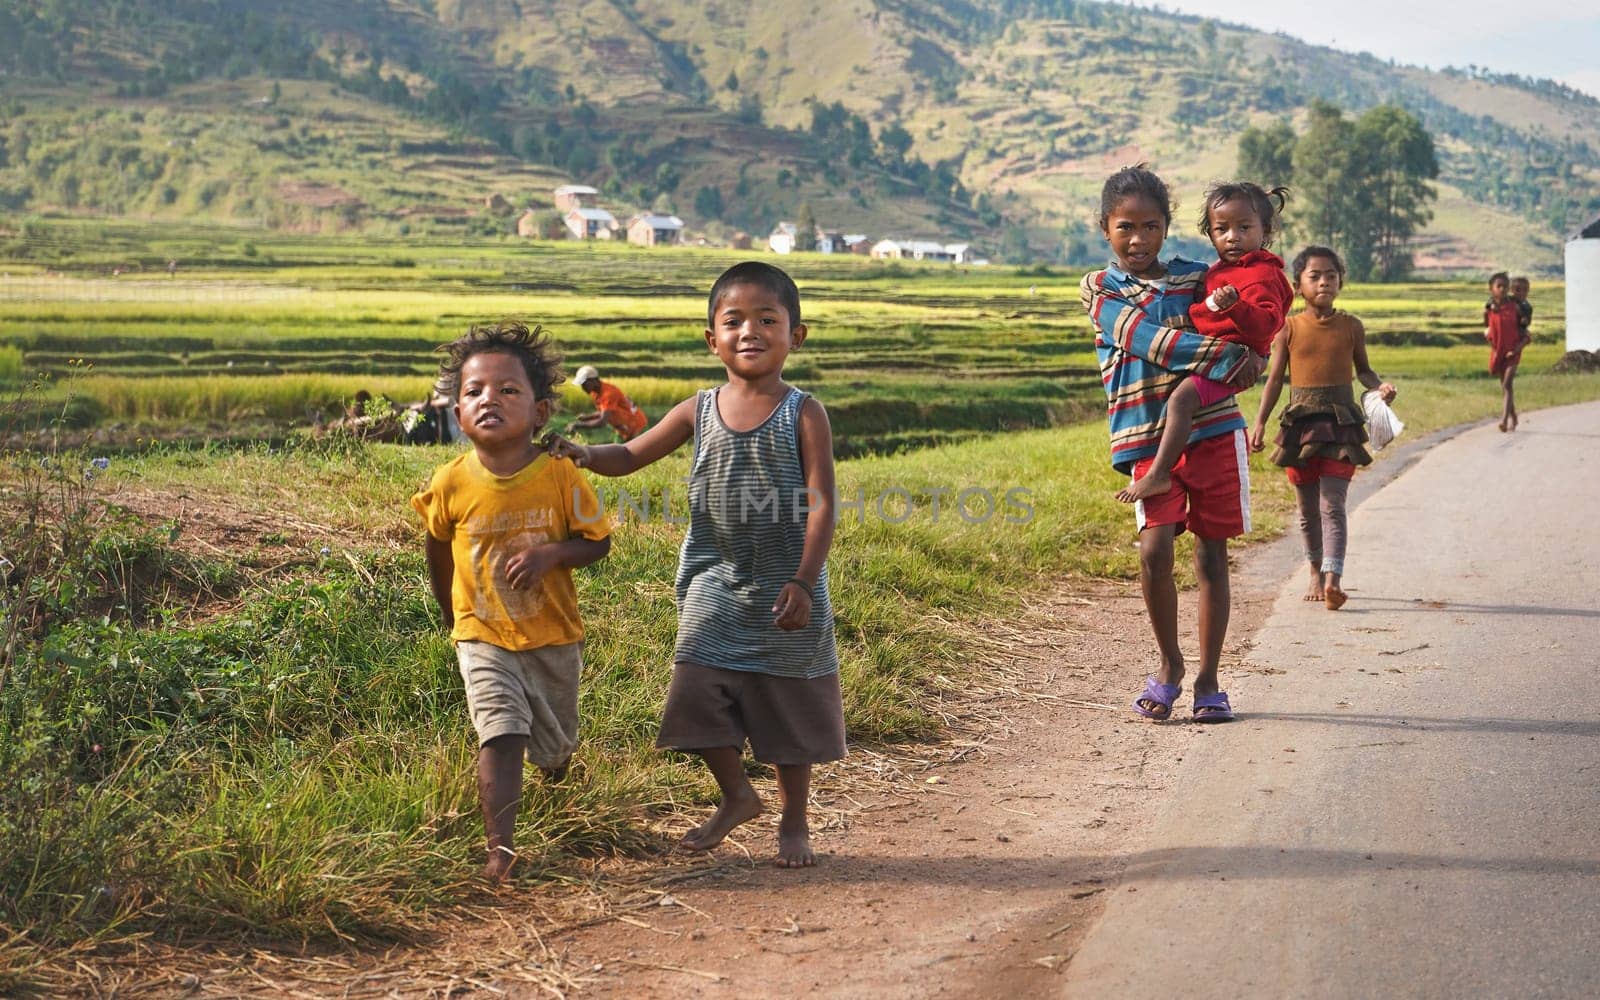 Manandoana, Madagascar - April 26, 2019: Group of unknown Malagasy kids running on road next to rice field, small hills in background, people at Madagascar are poor but cheerful, especially children by Ivanko